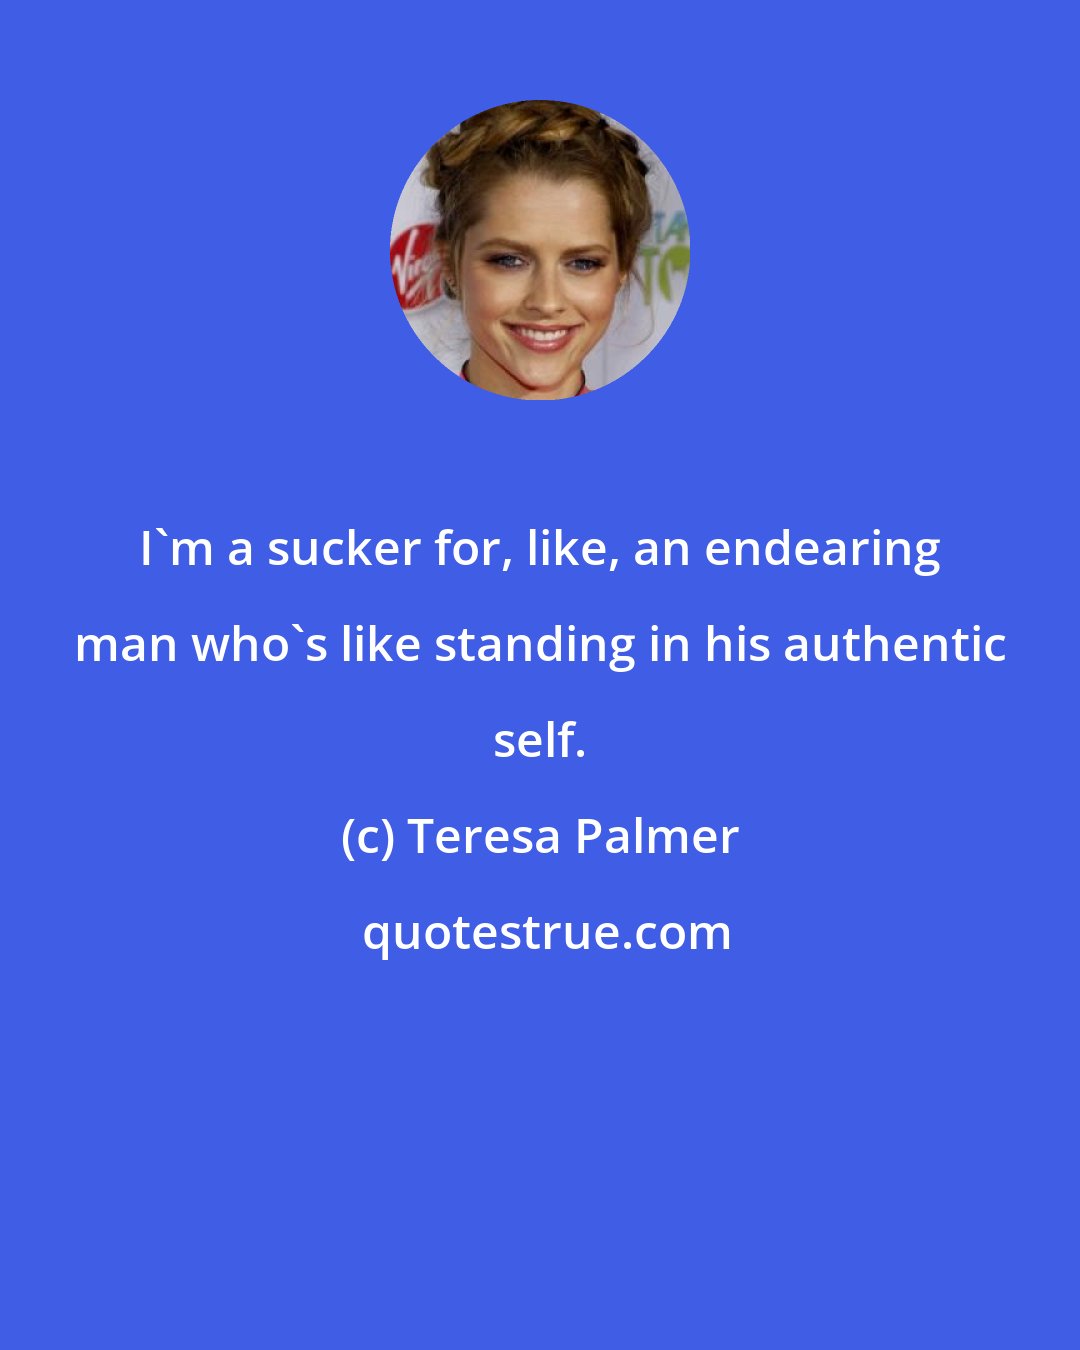 Teresa Palmer: I'm a sucker for, like, an endearing man who's like standing in his authentic self.